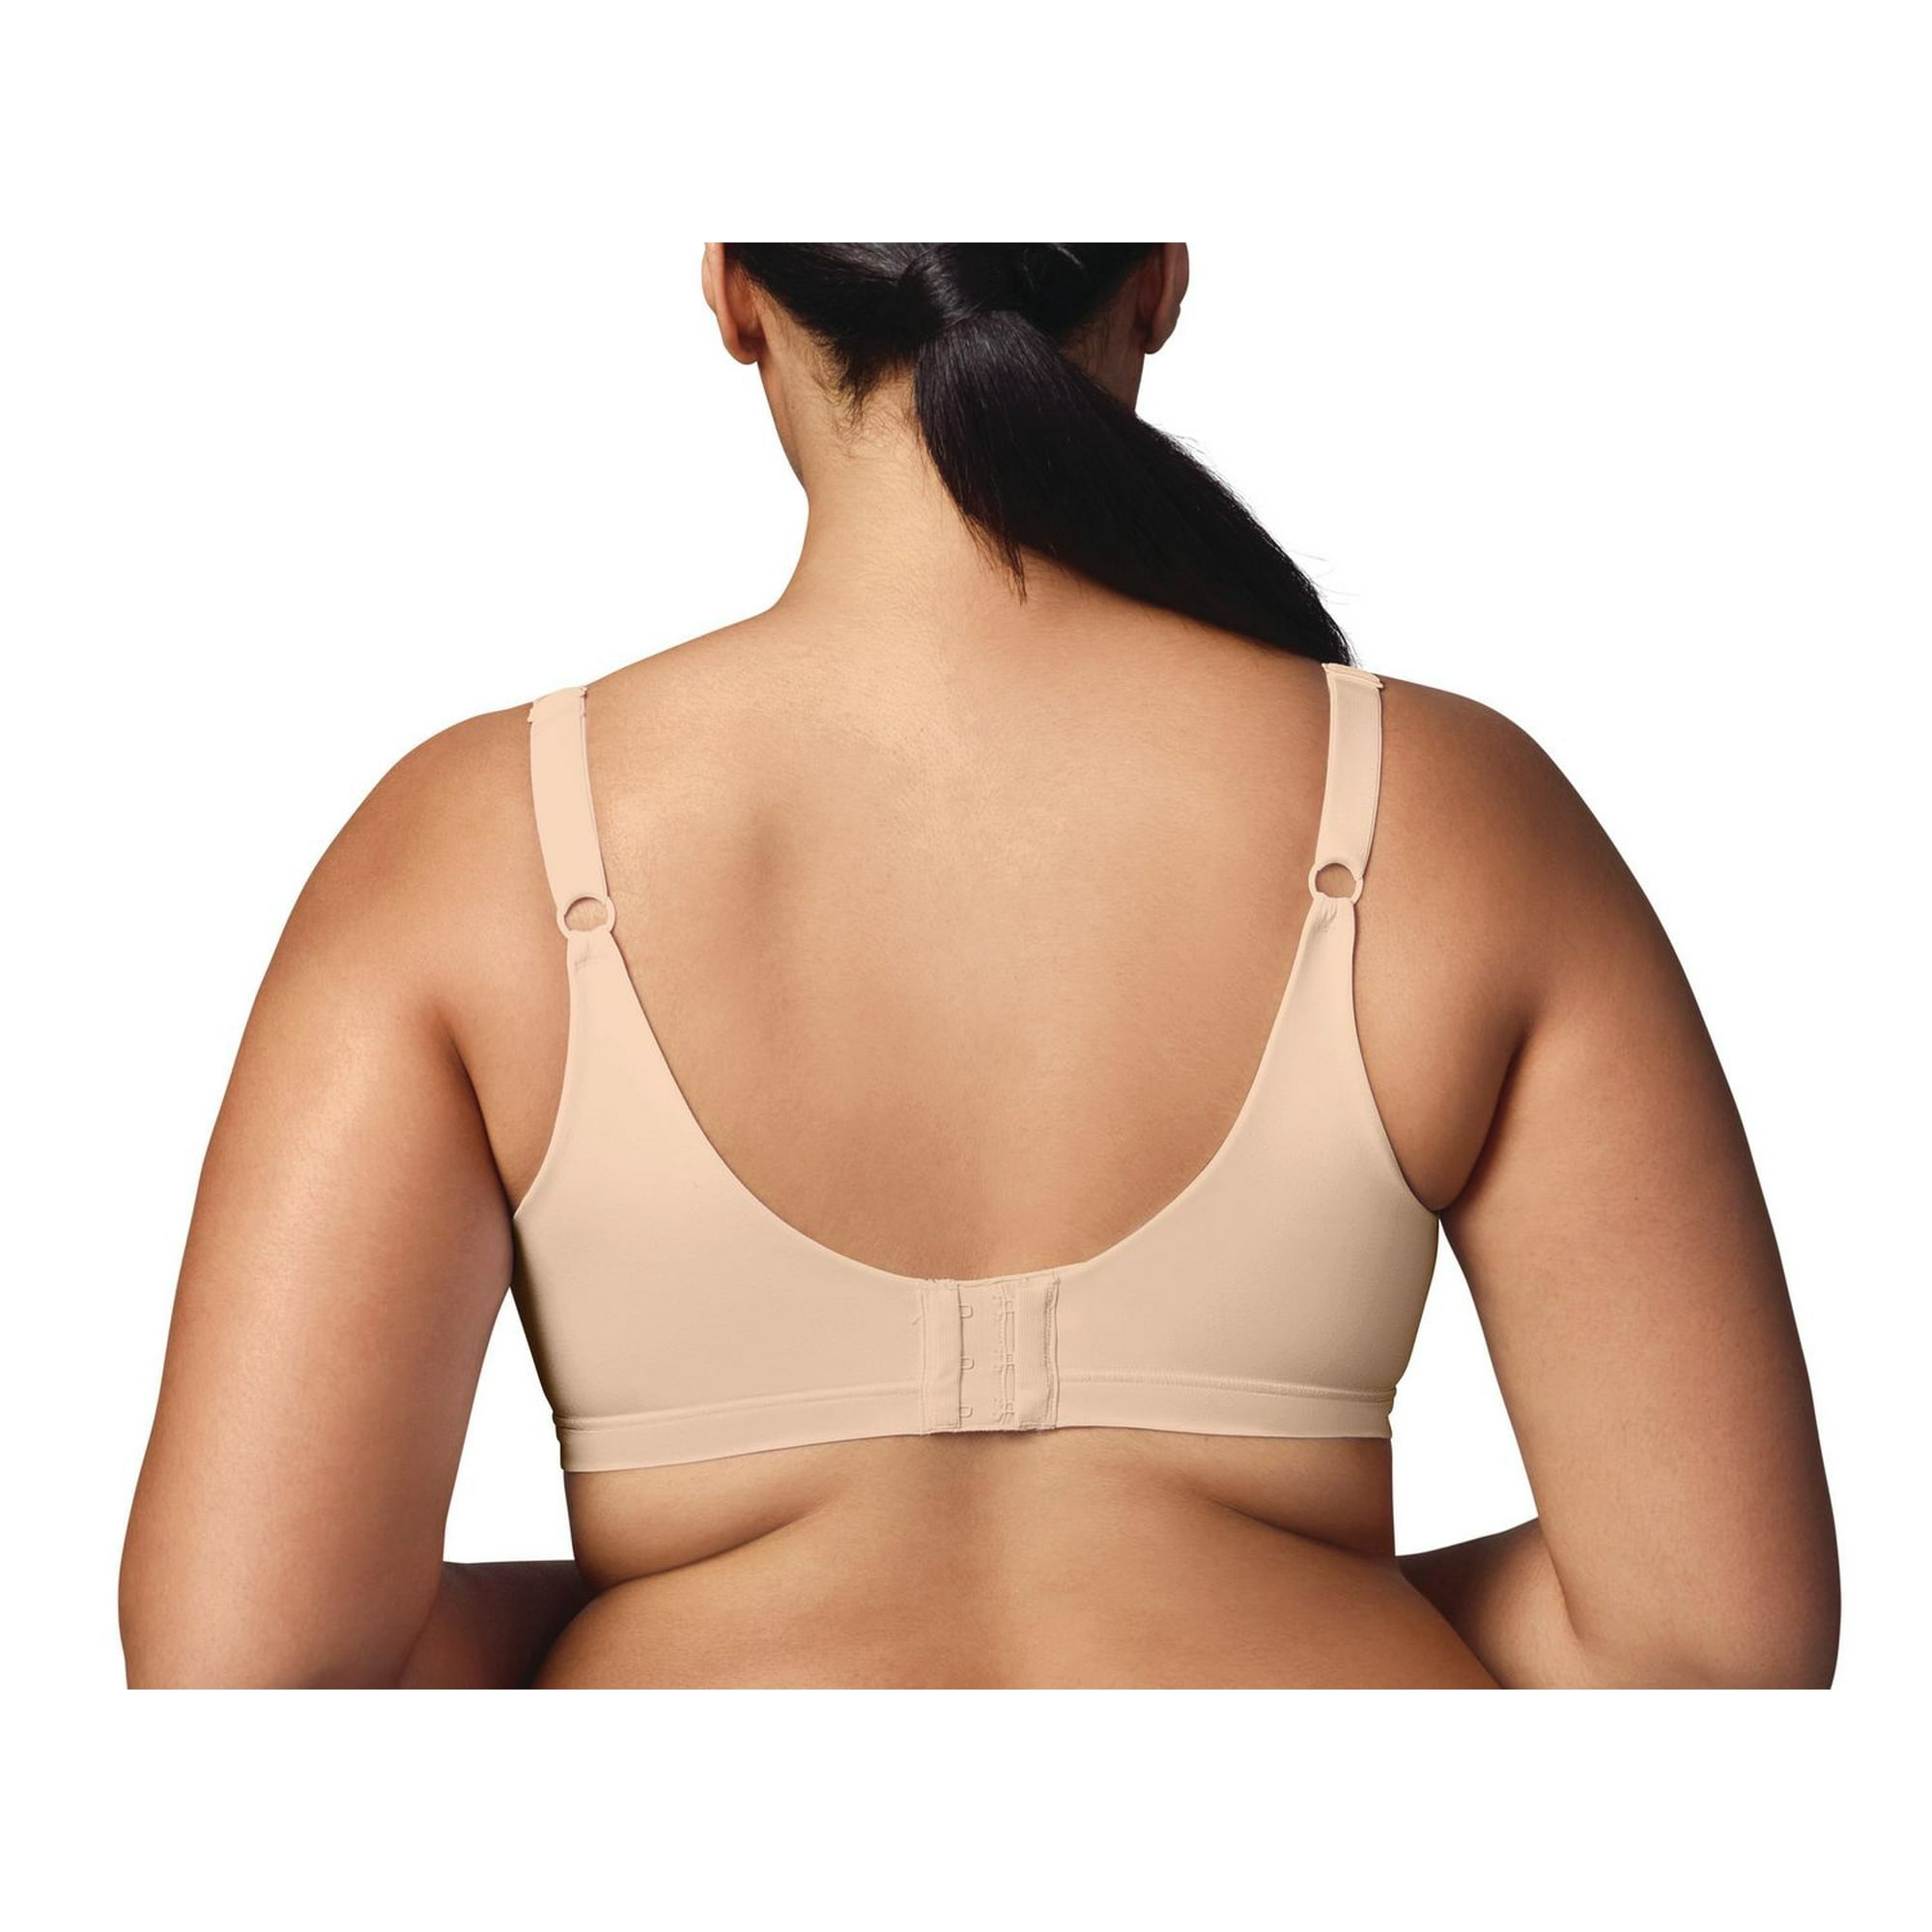 Well, bra sizes wary a lot according to the distance - #136664077 added by  wilicious at How big of a size would that be